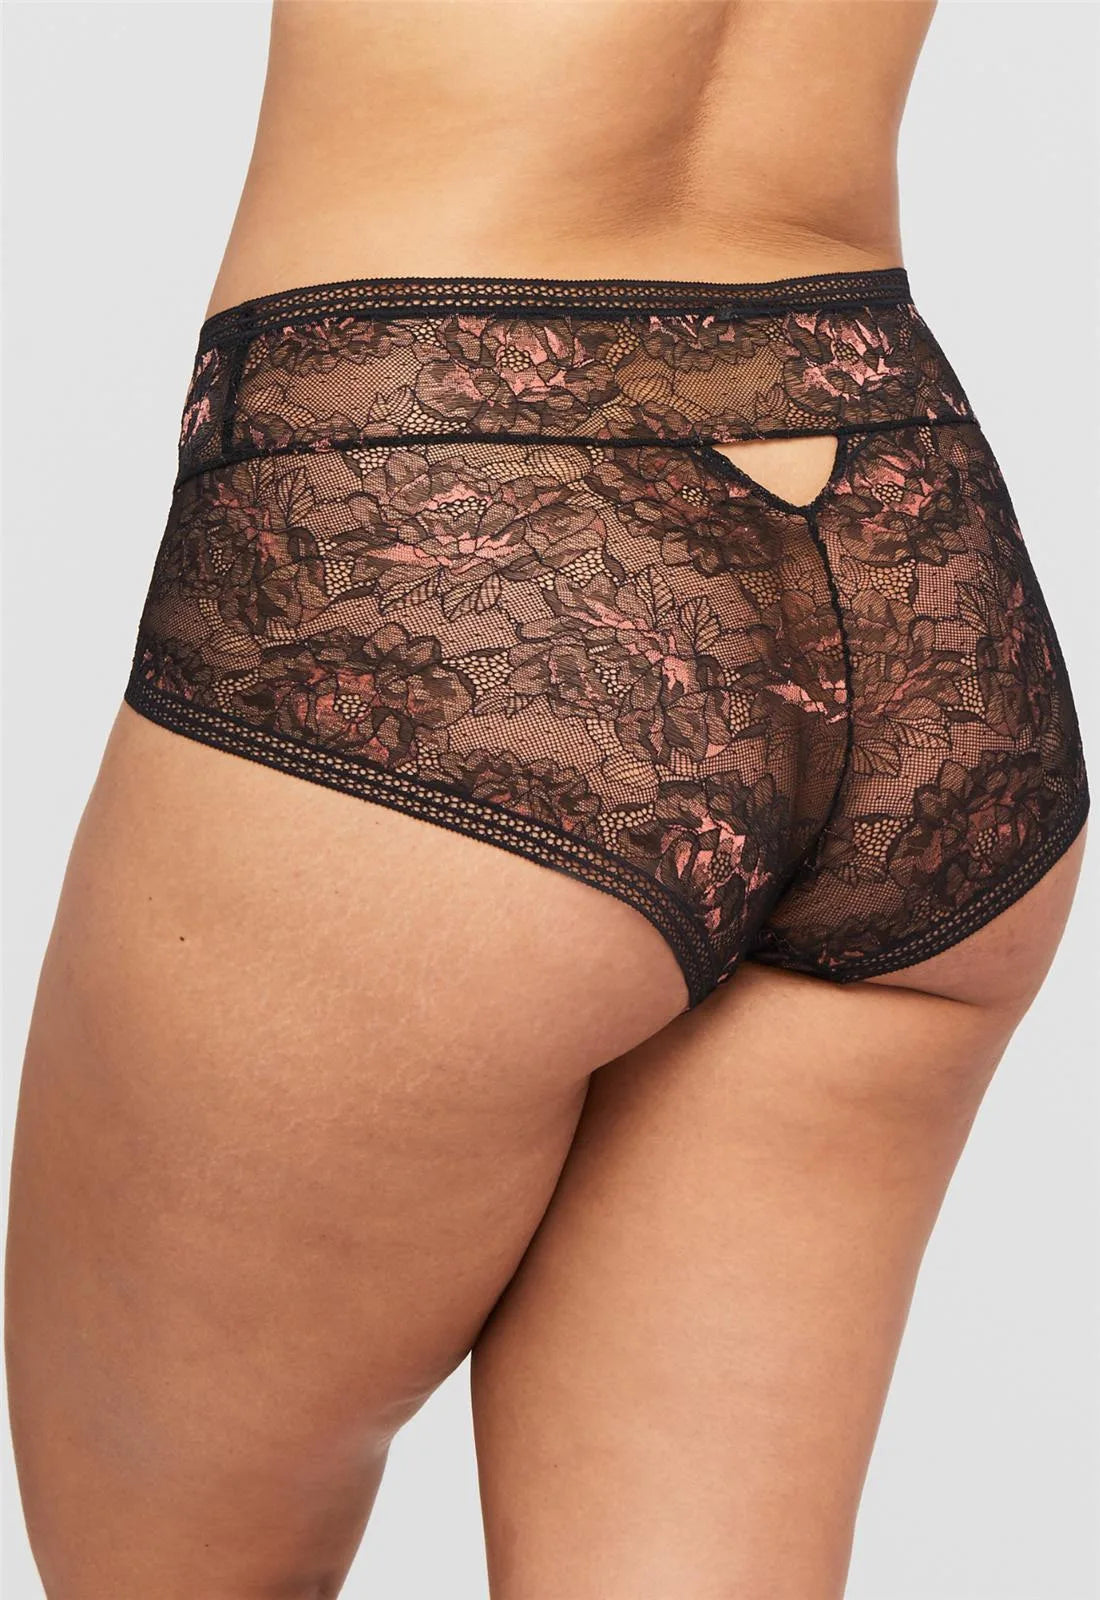 Enchanted Muse High-Waist Panty at Belle Lacet Lingerie